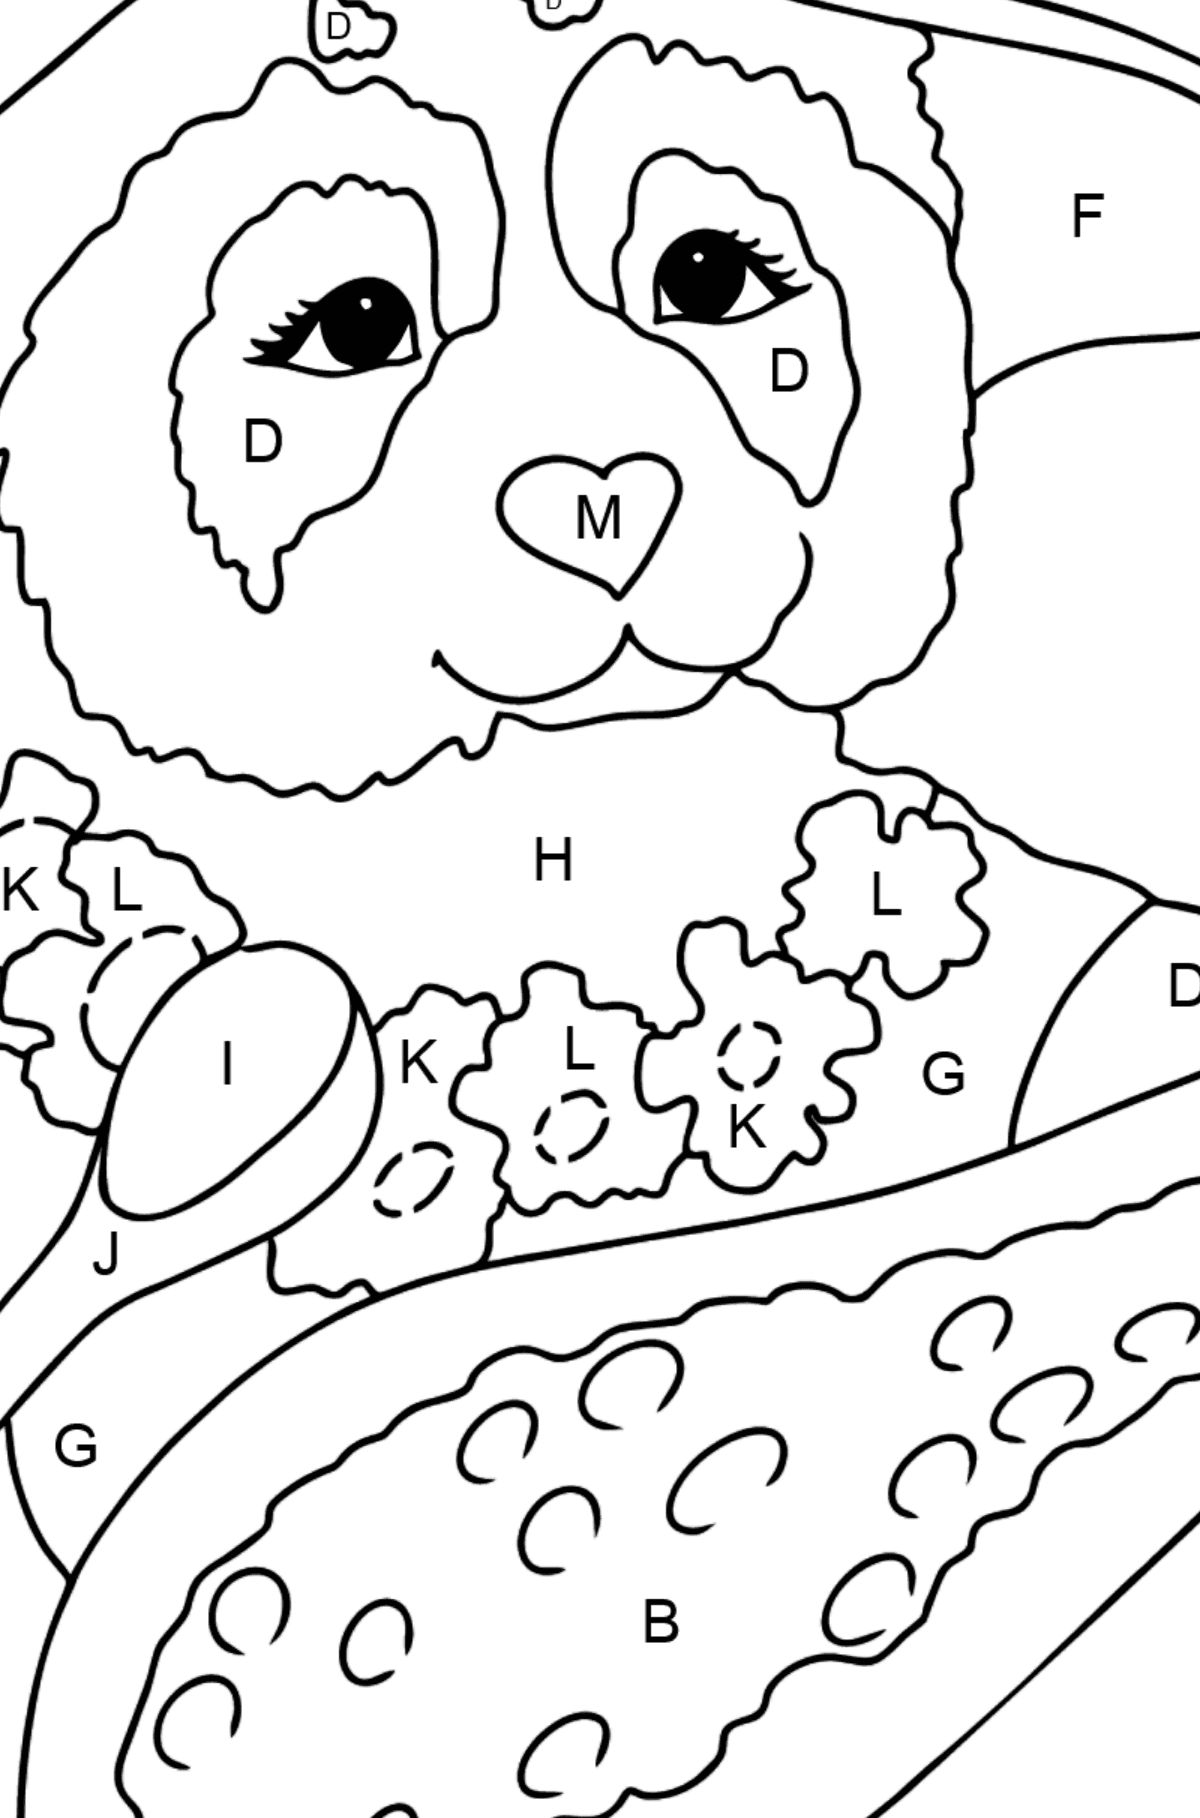 Coloring Page - A Panda is Eating - Coloring by Letters for Kids